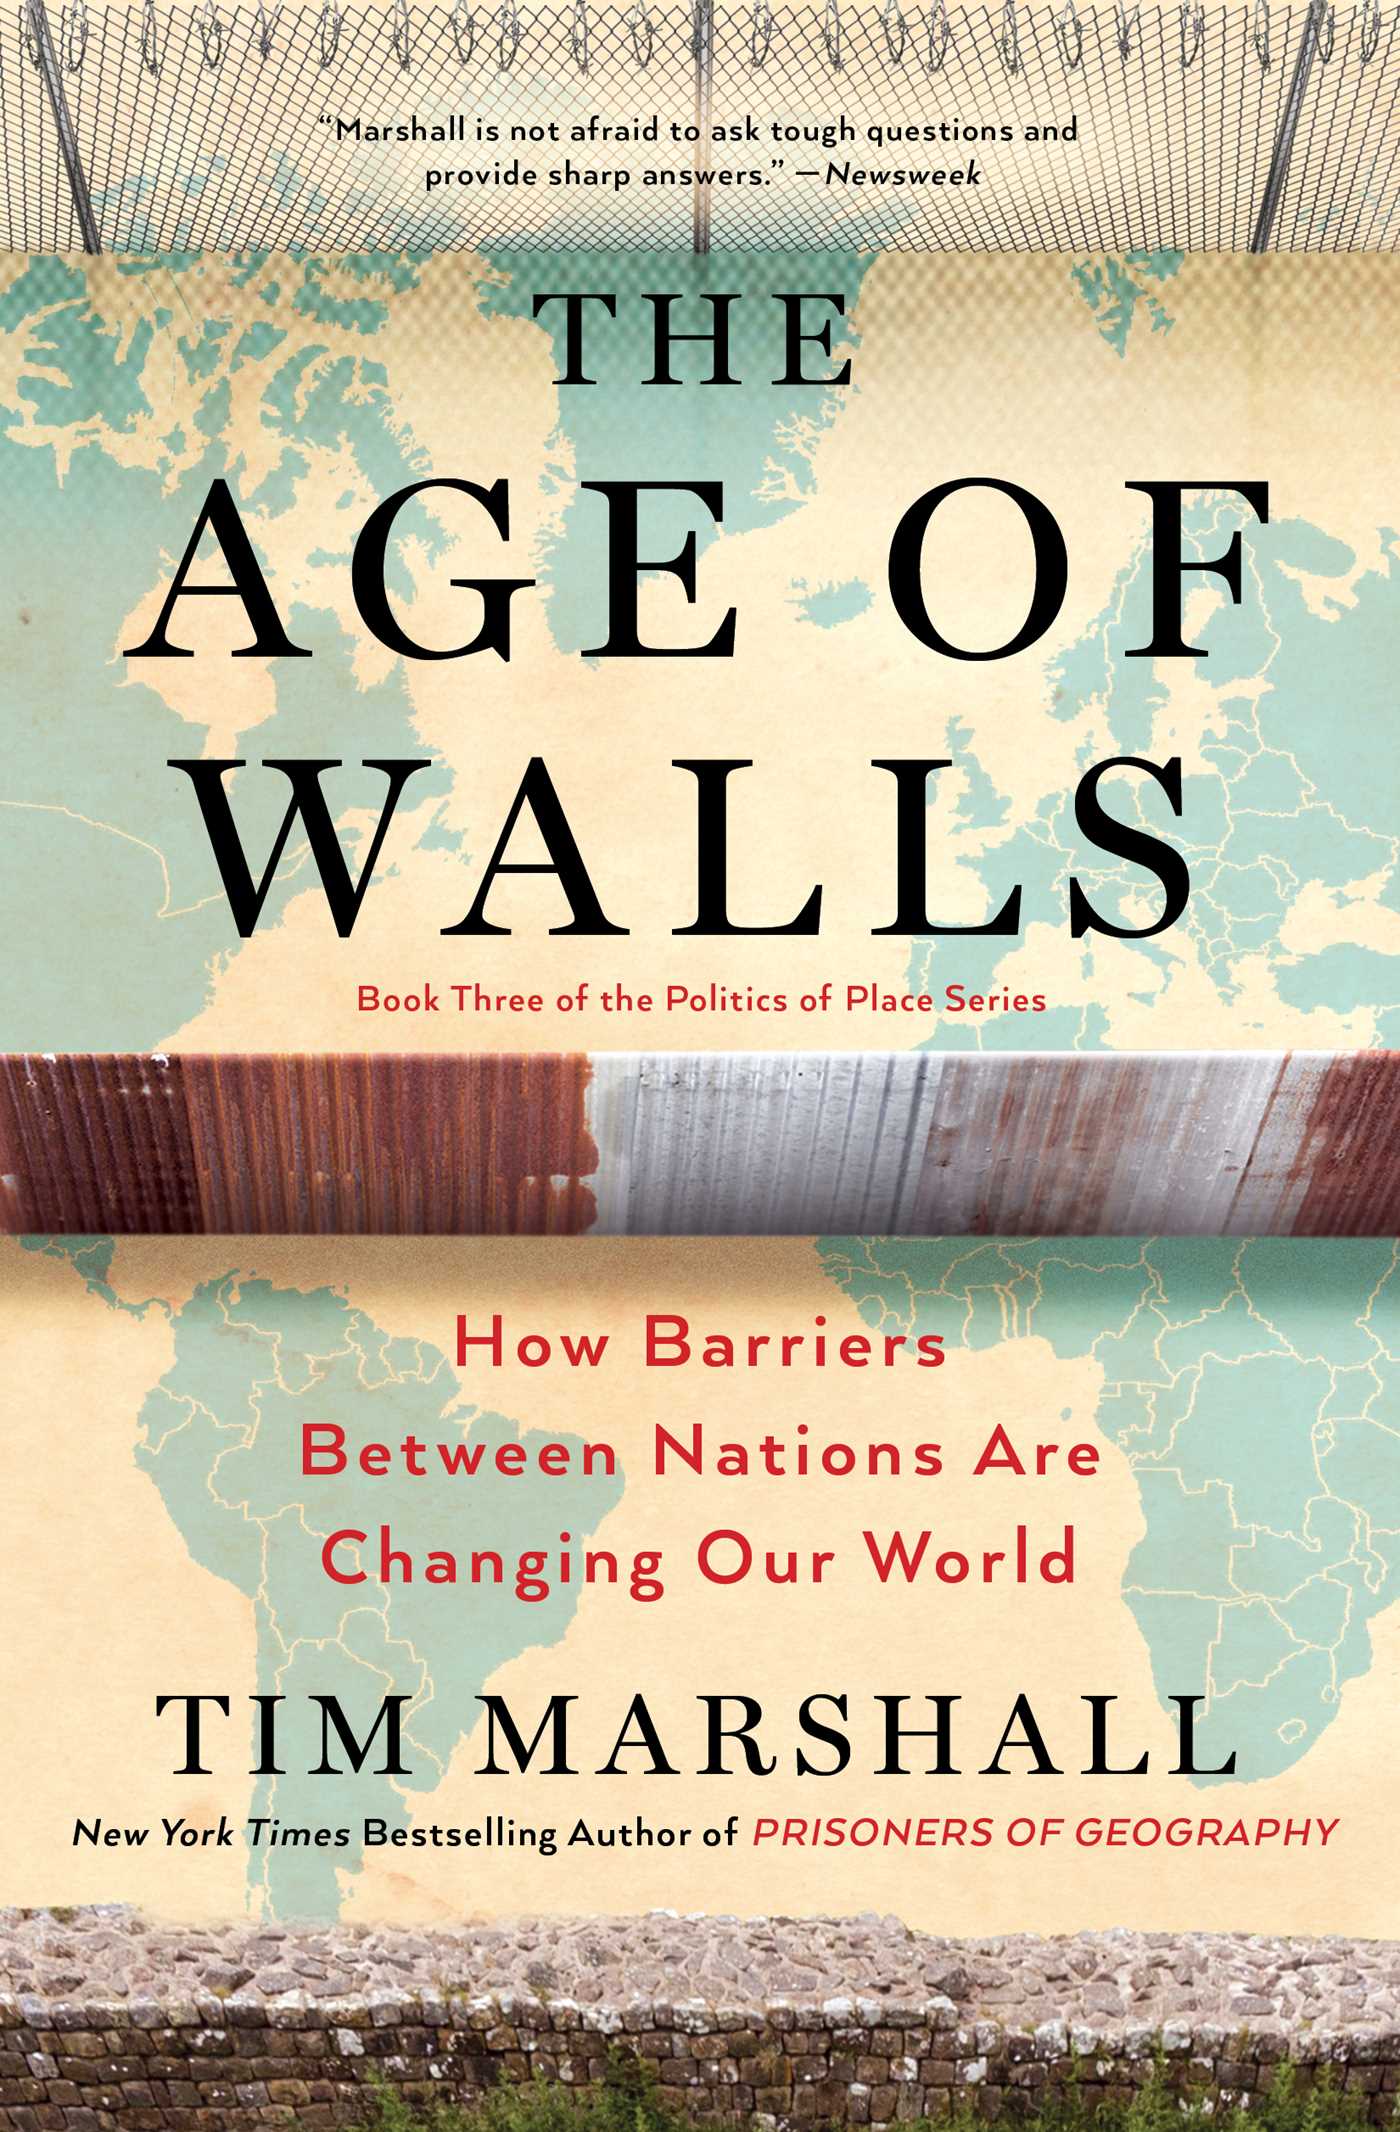 THE AGE OF WALLS BY TIM MARSHAL